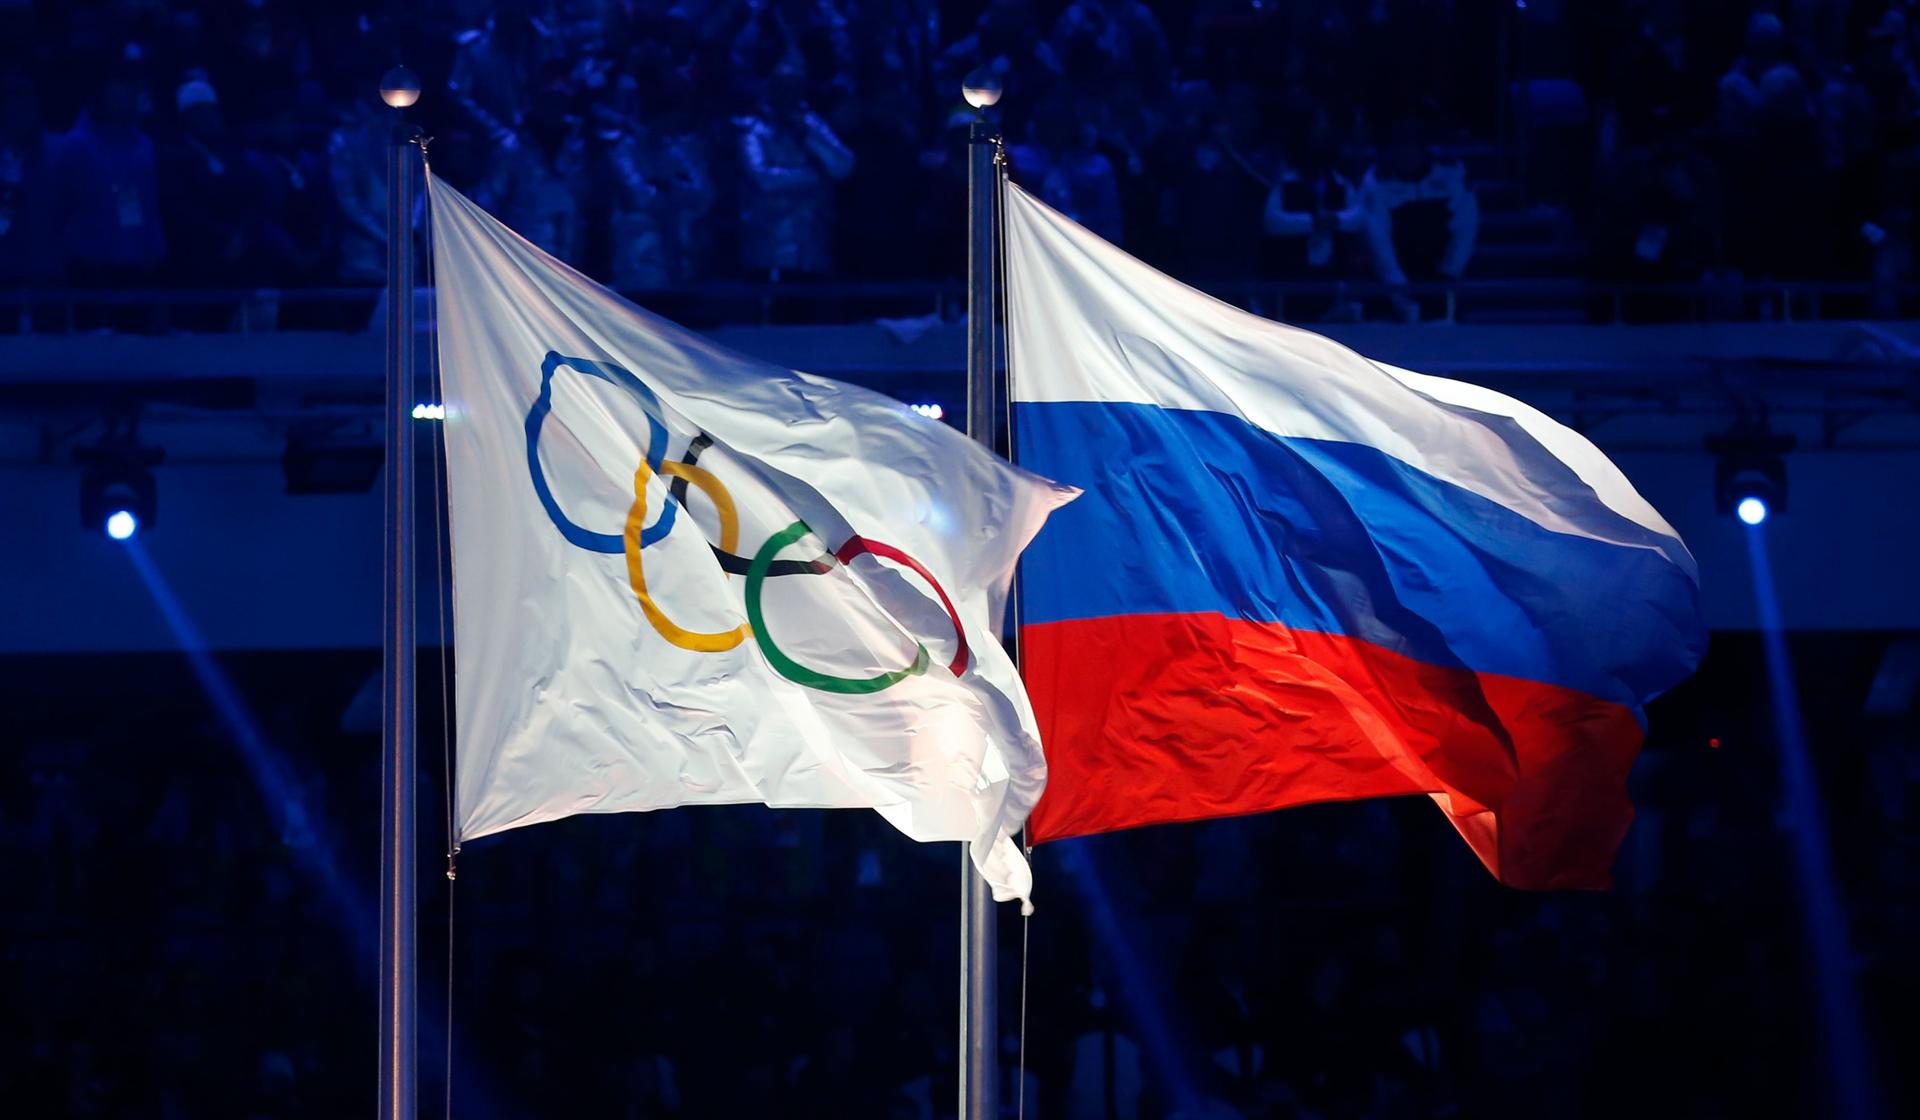 The Olympic and Russian flags are raised during the opening ceremony of the 2014 Sochi Winter Olympics.